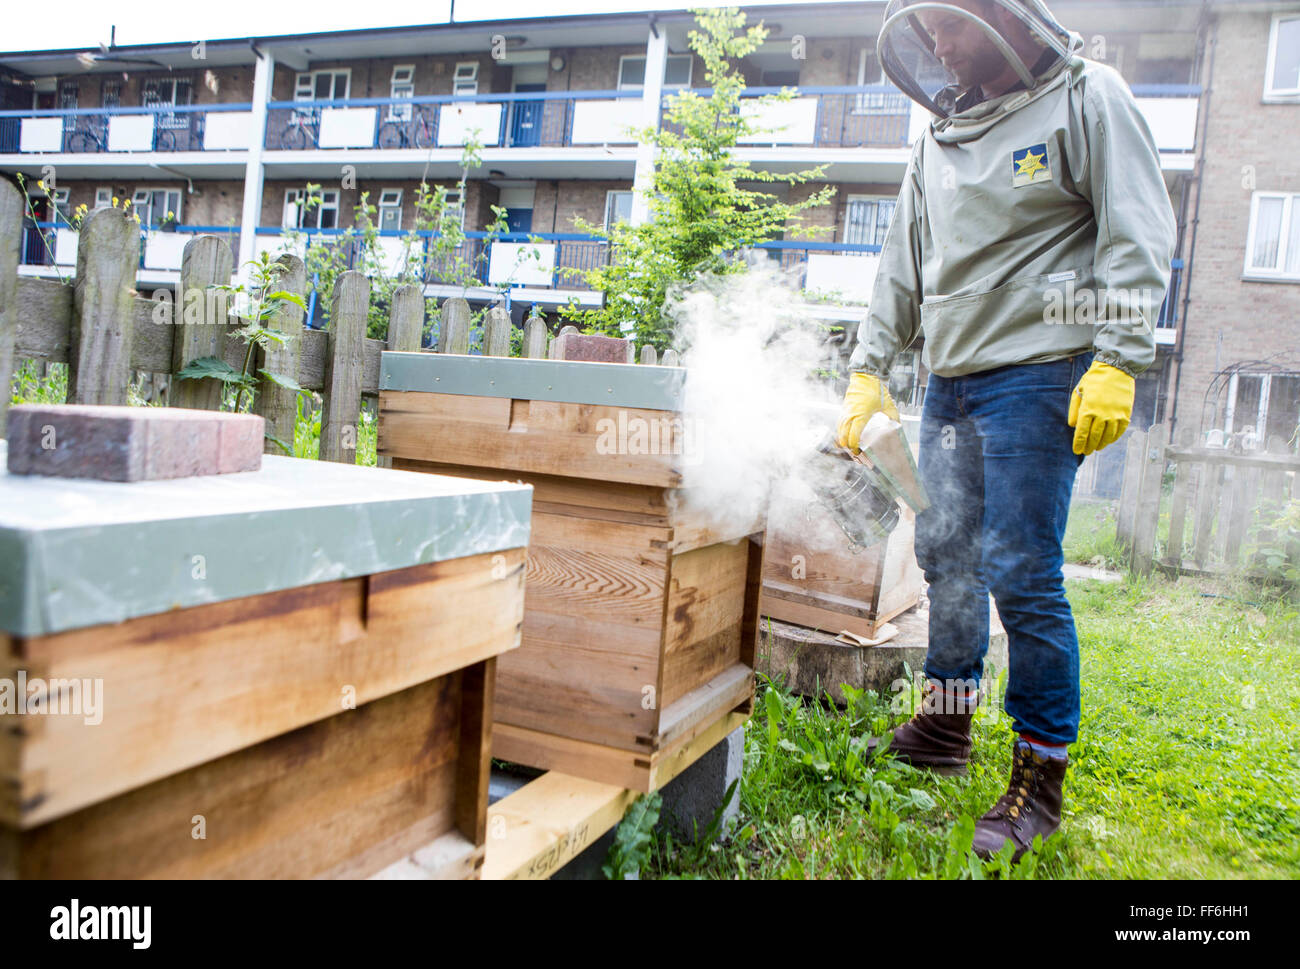 Bee keeper using a smoker to calm the bees before openng the hives. Urban bee keeping, community garden project, George Downing Estate, Hackney, East London. Stock Photo